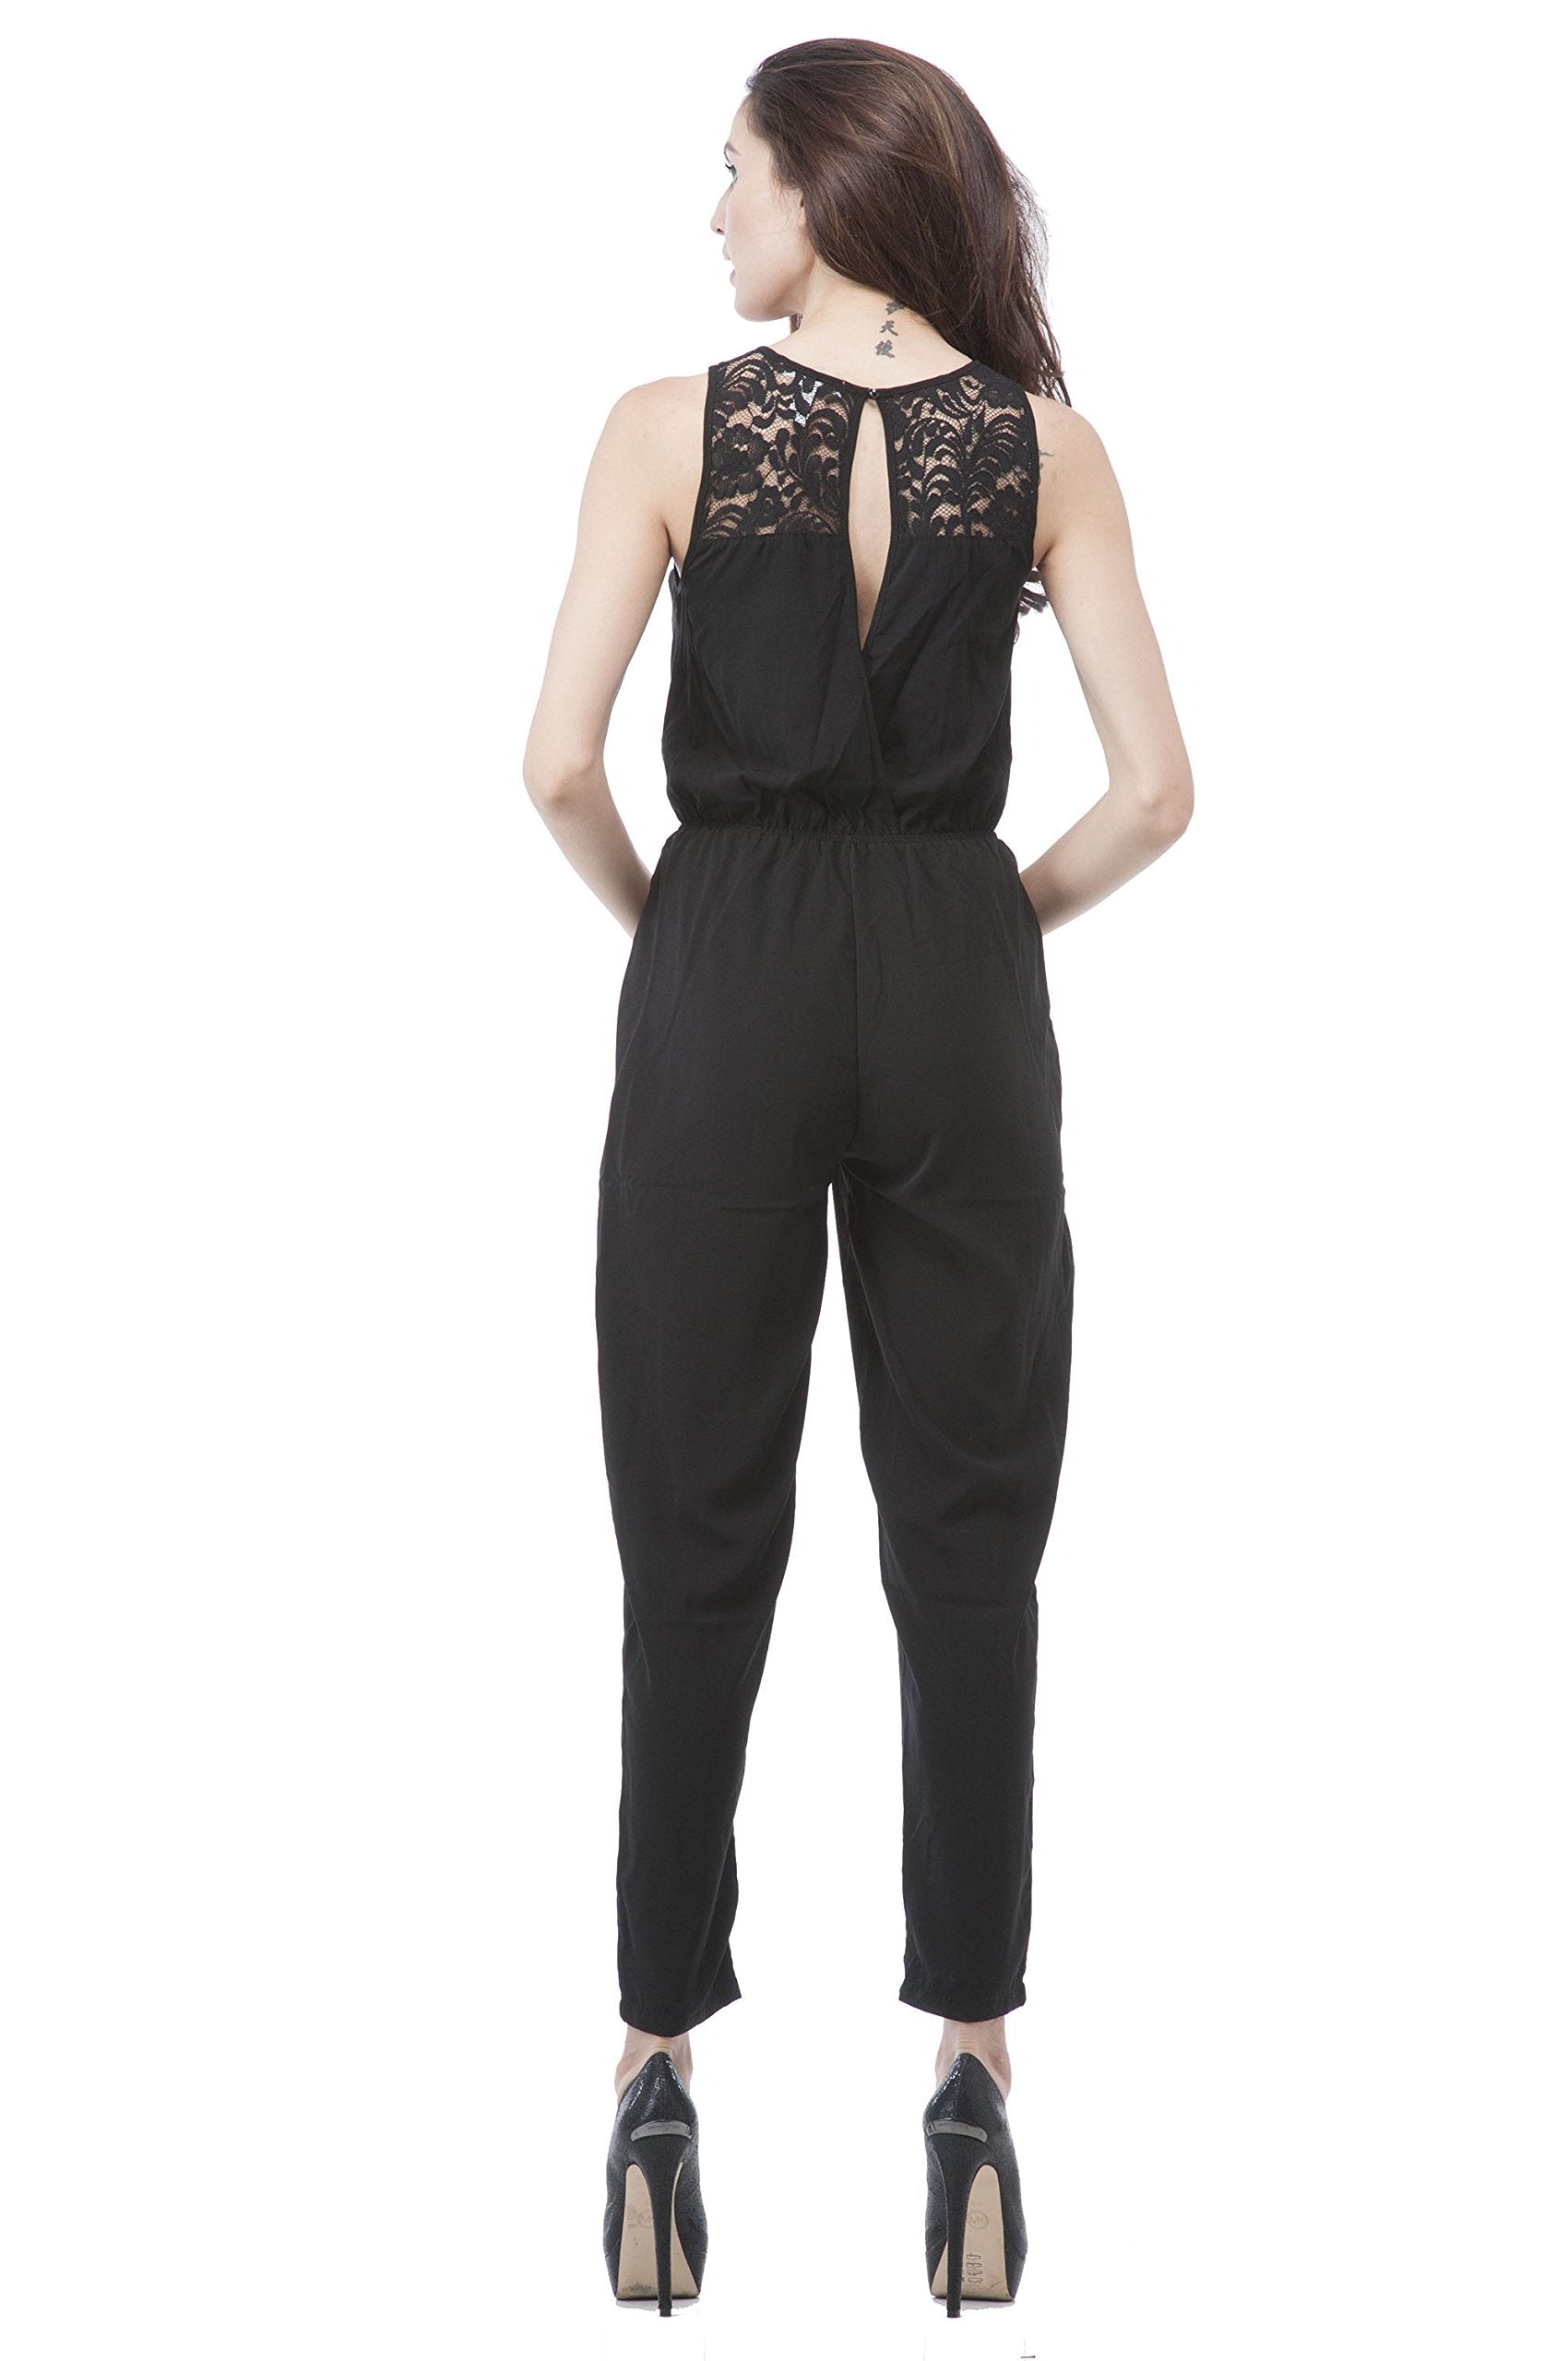 Hollywood Star Fashion Sleeveless Open Back Lace Trim Jumpsuit